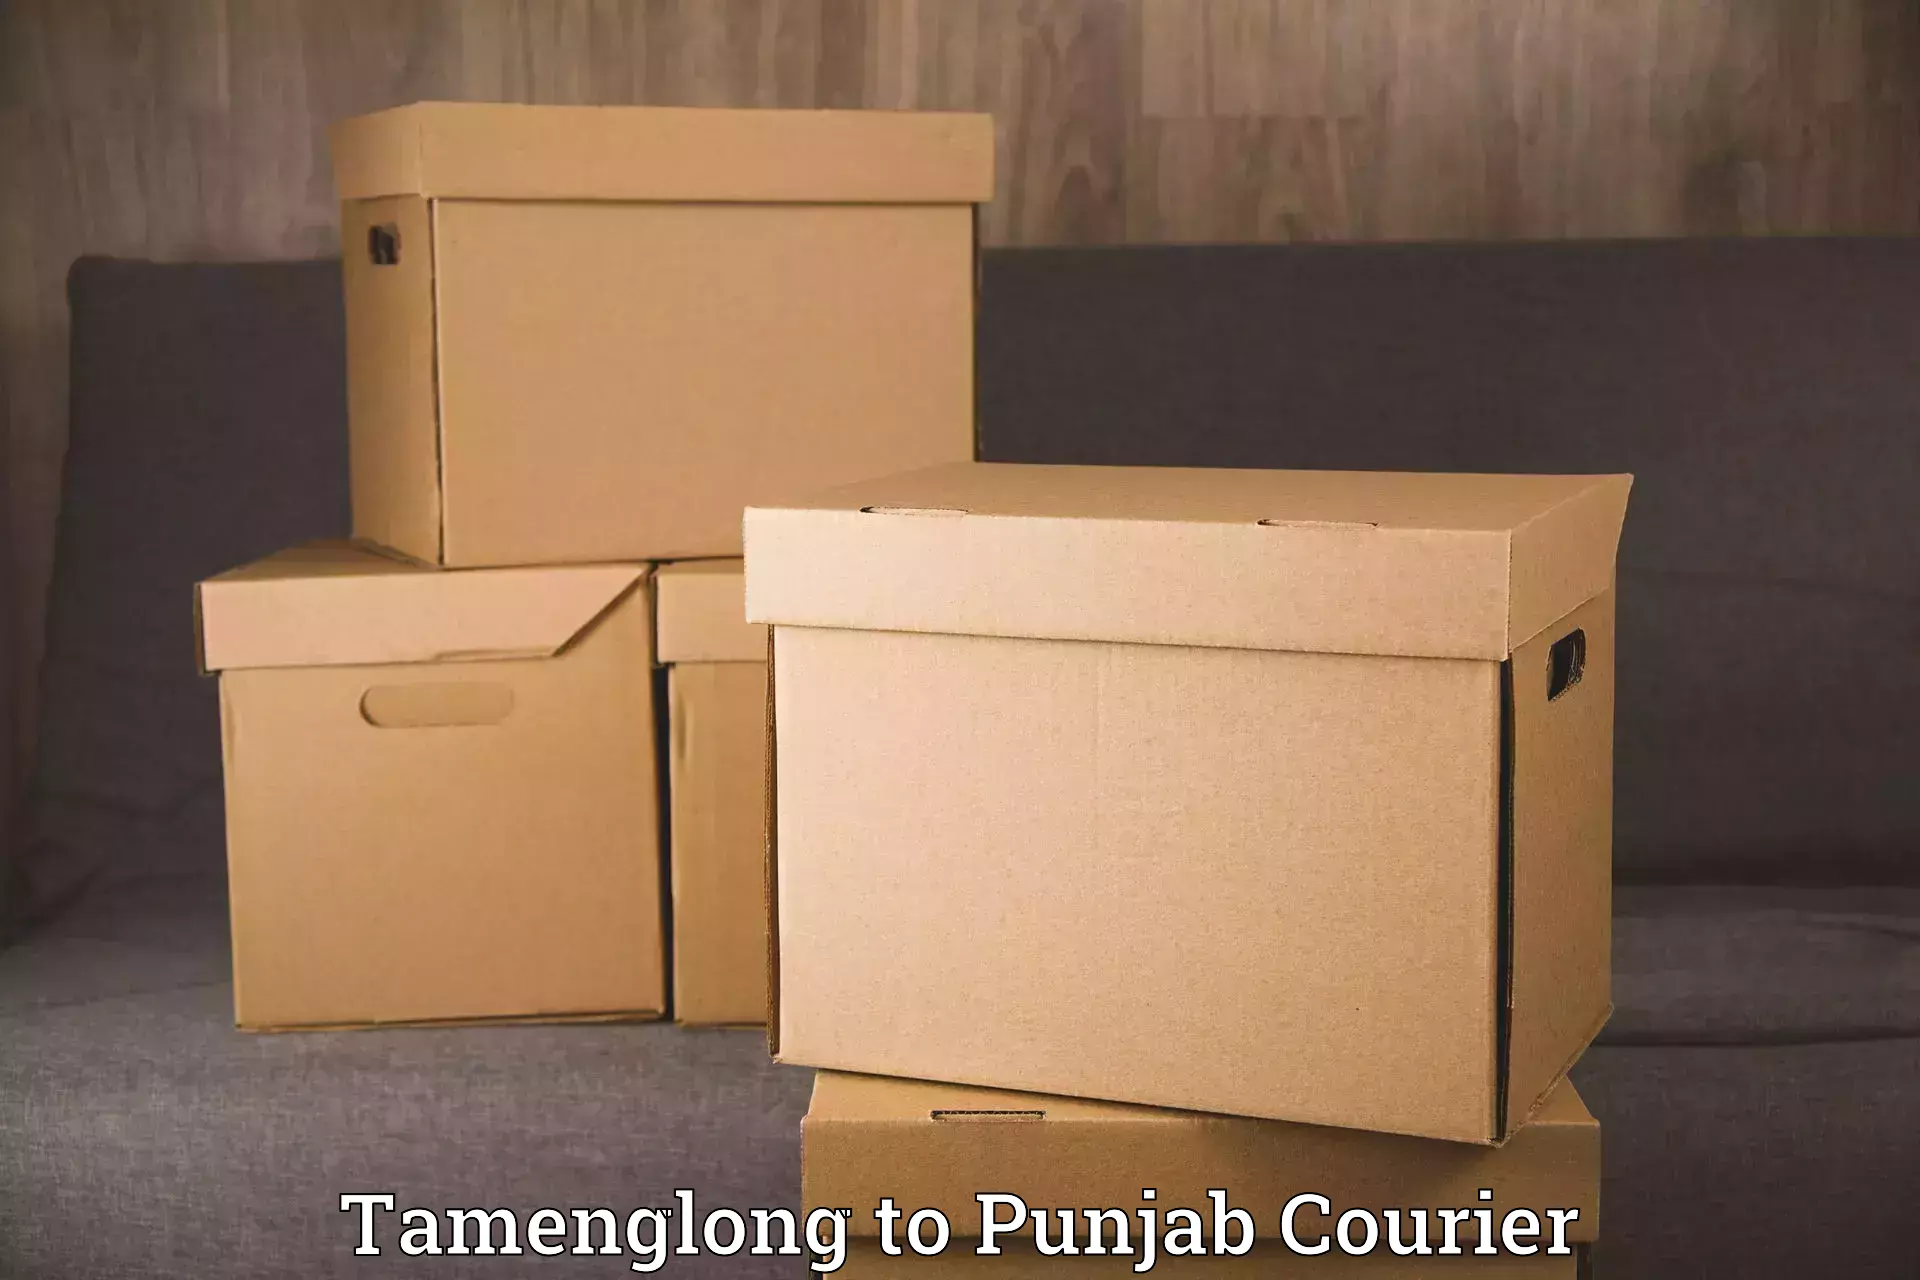 Budget-friendly movers Tamenglong to Punjab